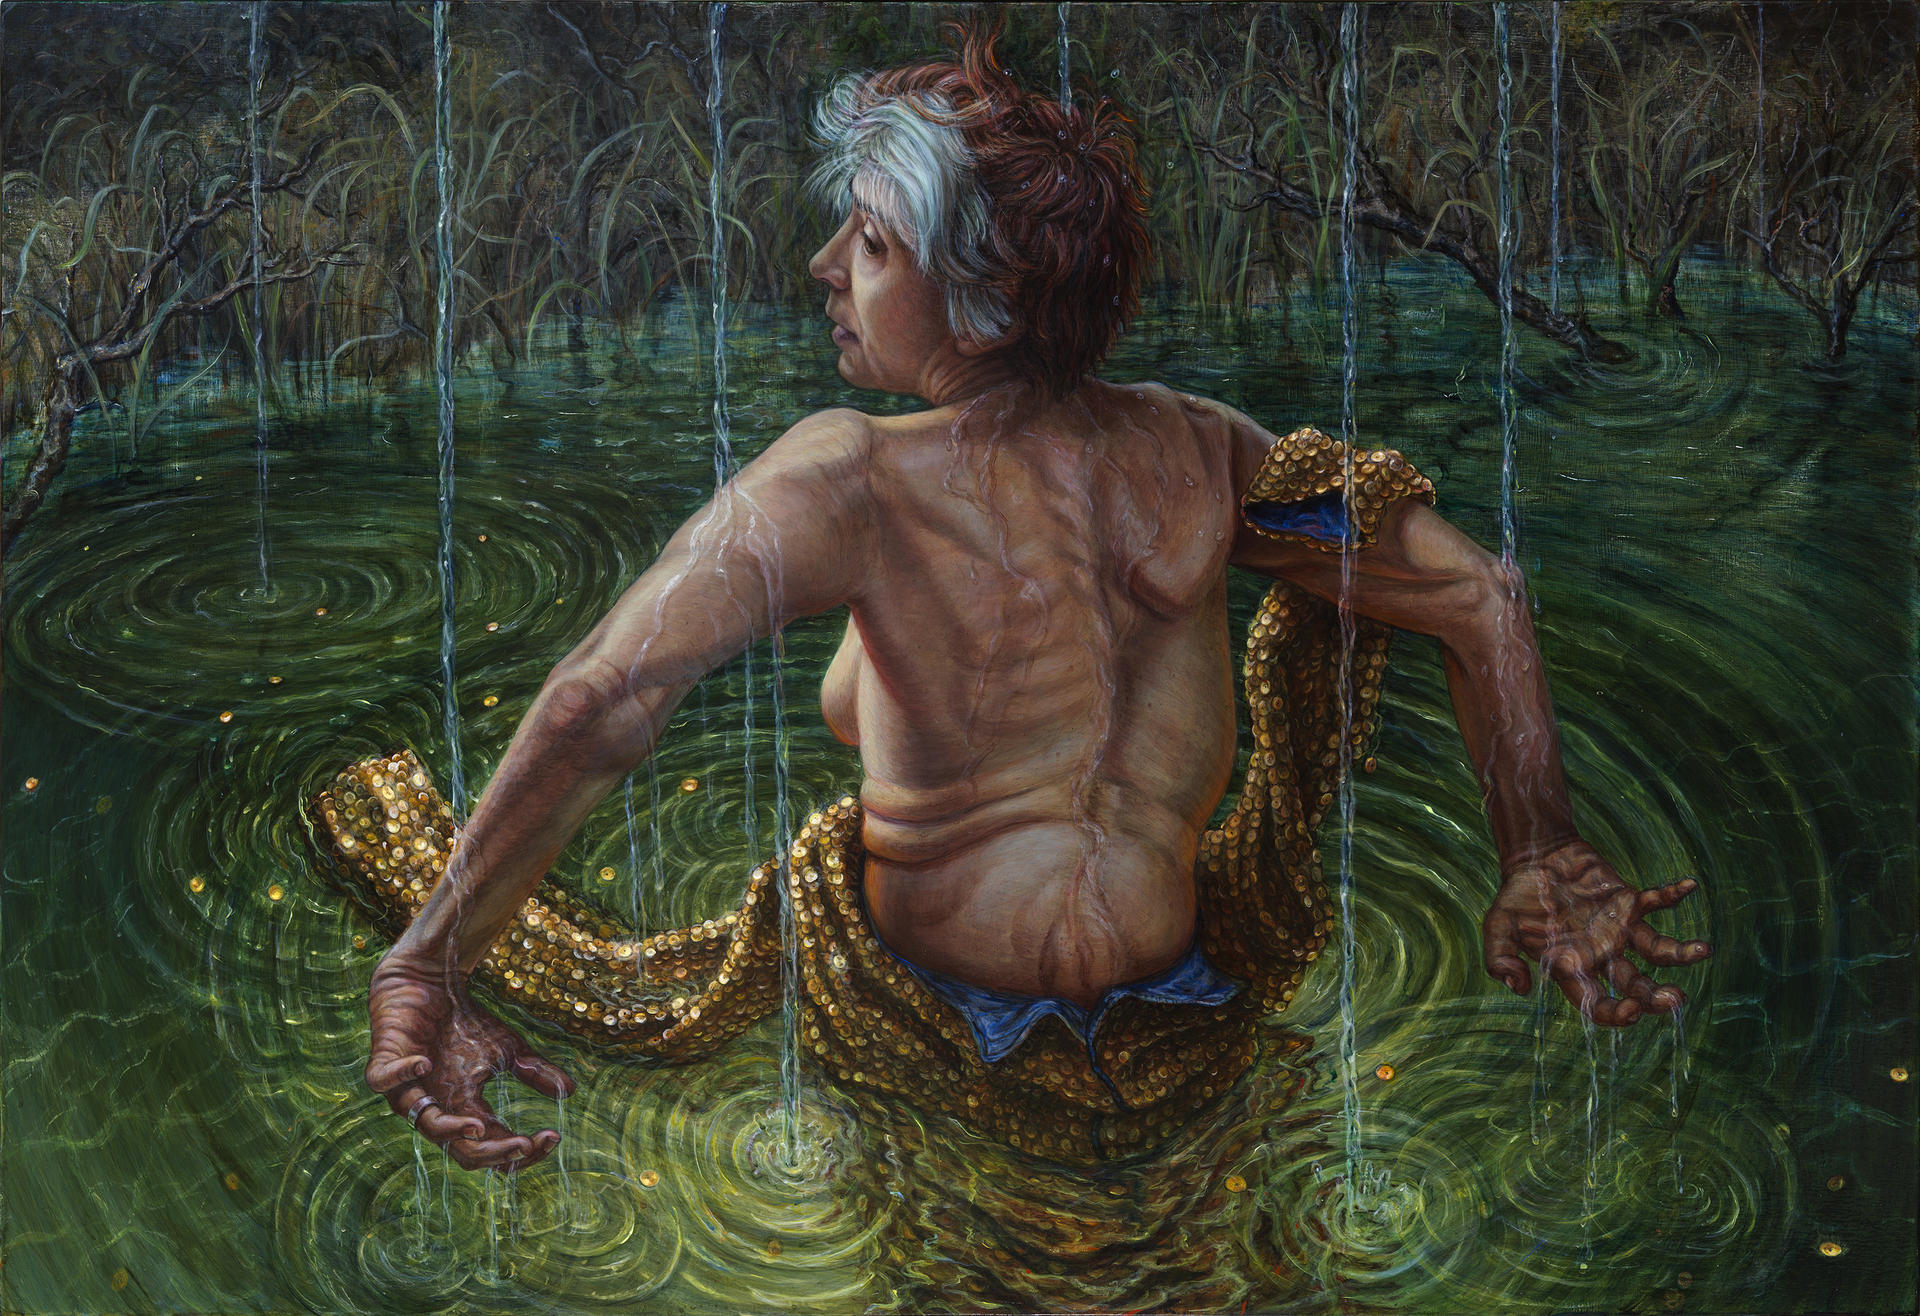 Painting of an older, partially-clothed woman, her twisted spine facing the viewer and her hands reaching behind her. She is surrounded by rippling shallow emerald water.